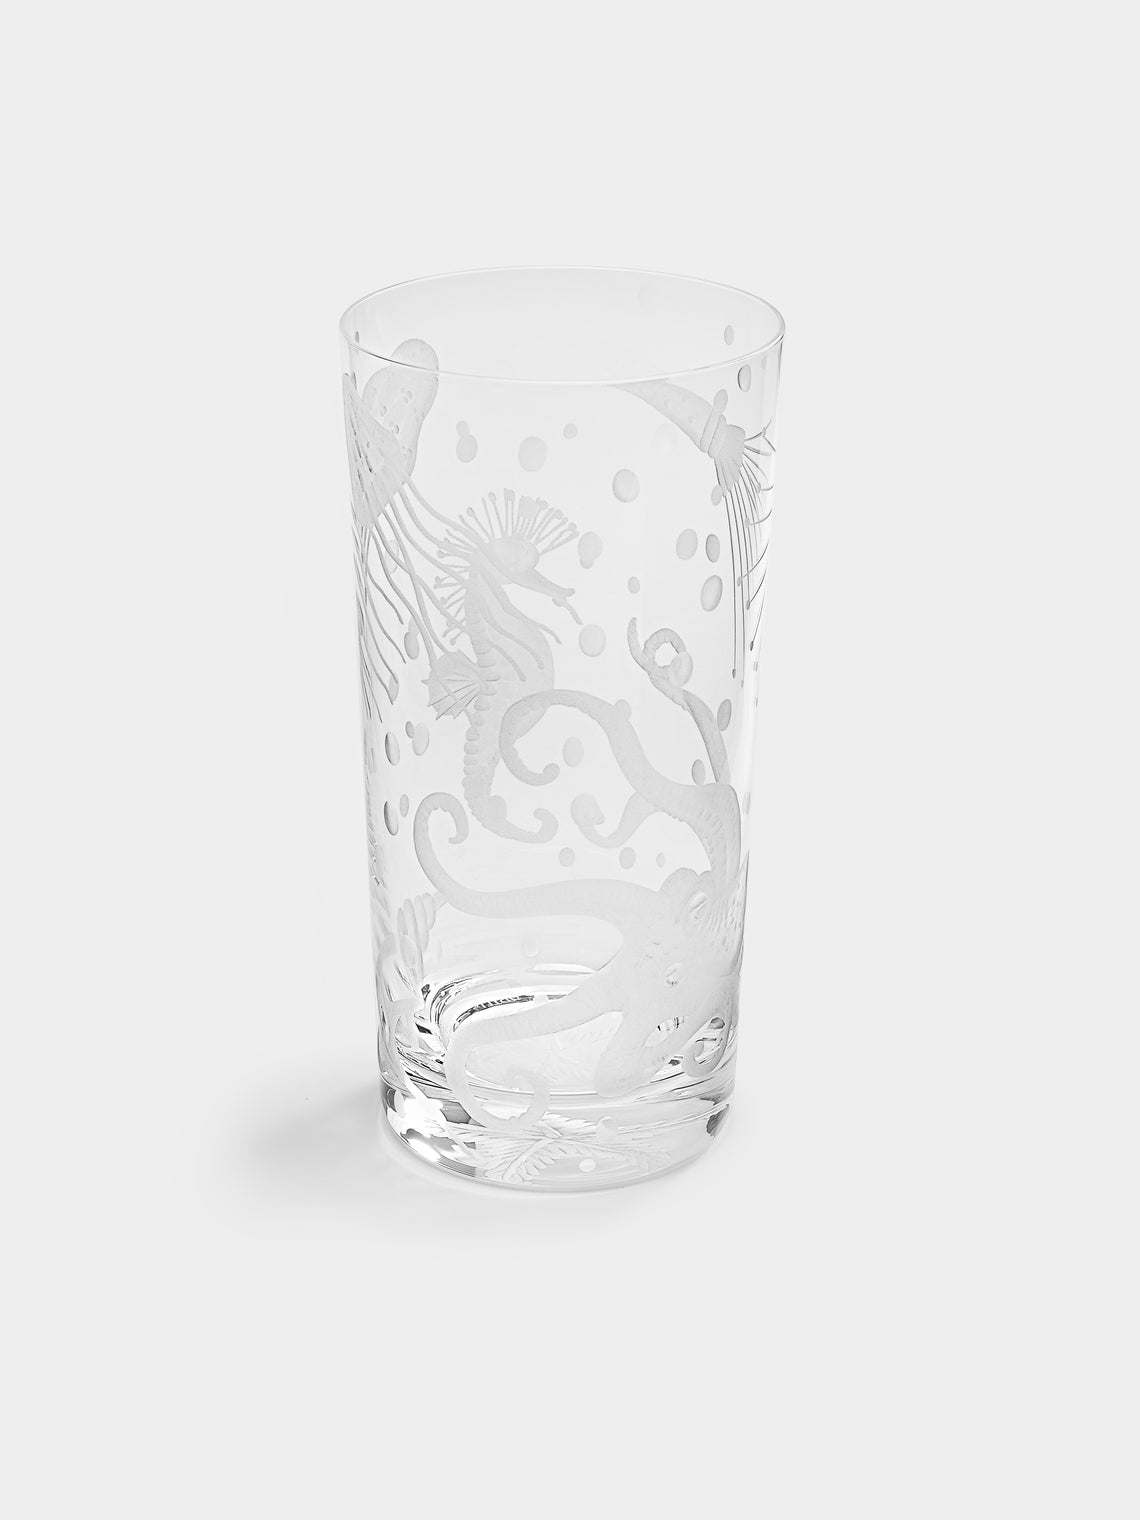 Artel - Frutti di Mare Hand-Engraved Crystal Highballs (Set of 6) -  - ABASK